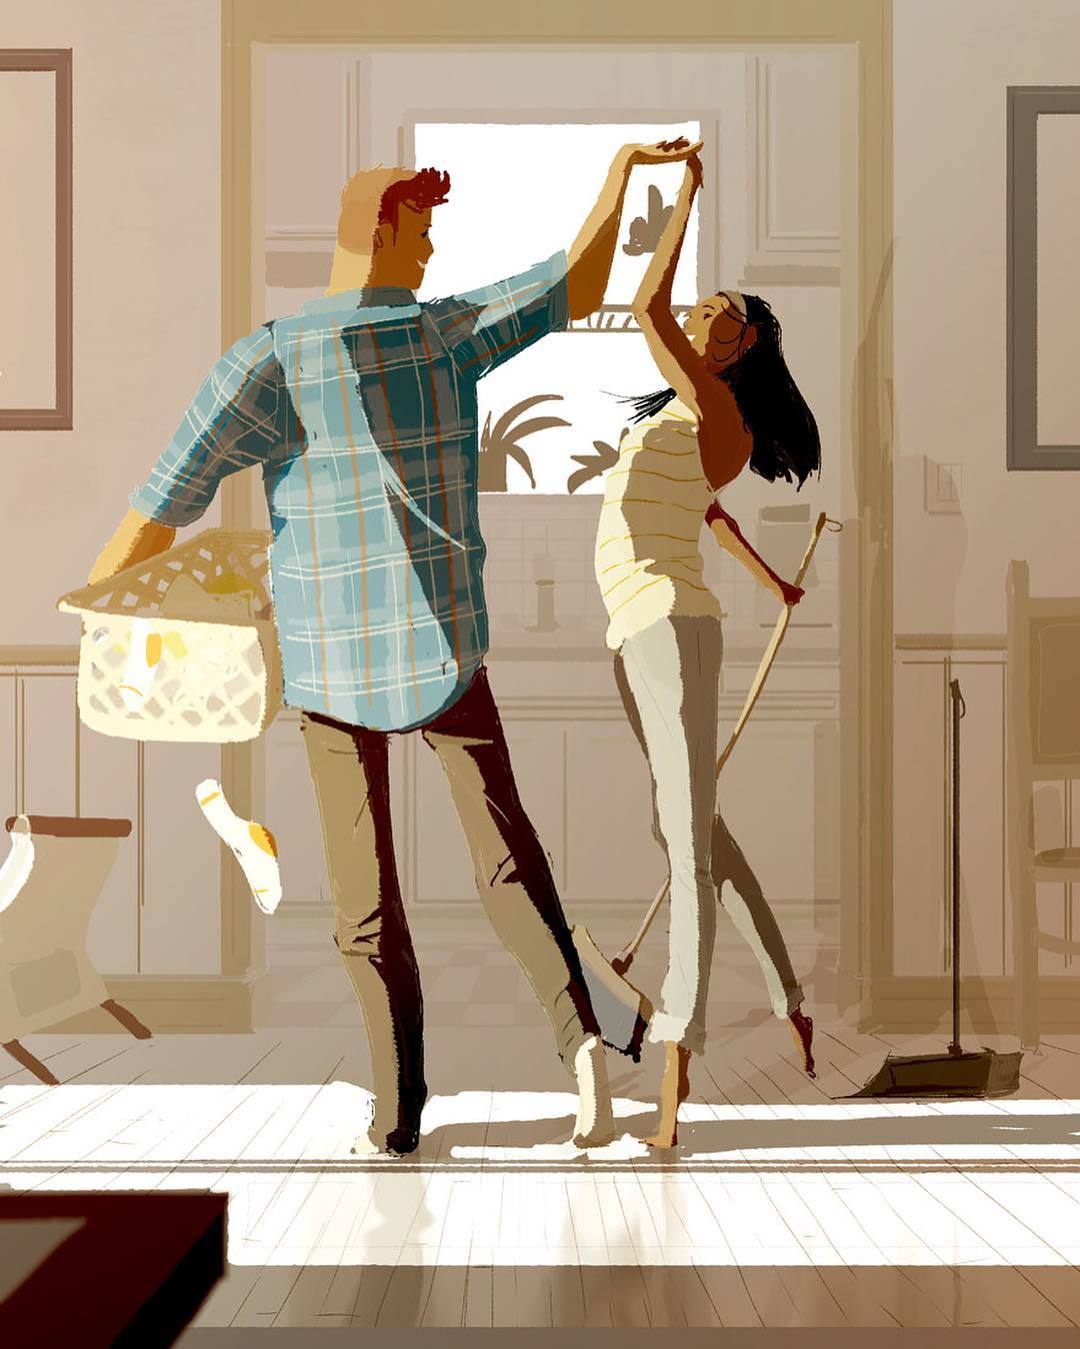 Love Is In The Little Things Proves Pascal Campion By Illustrating His Everyday Life With Wife